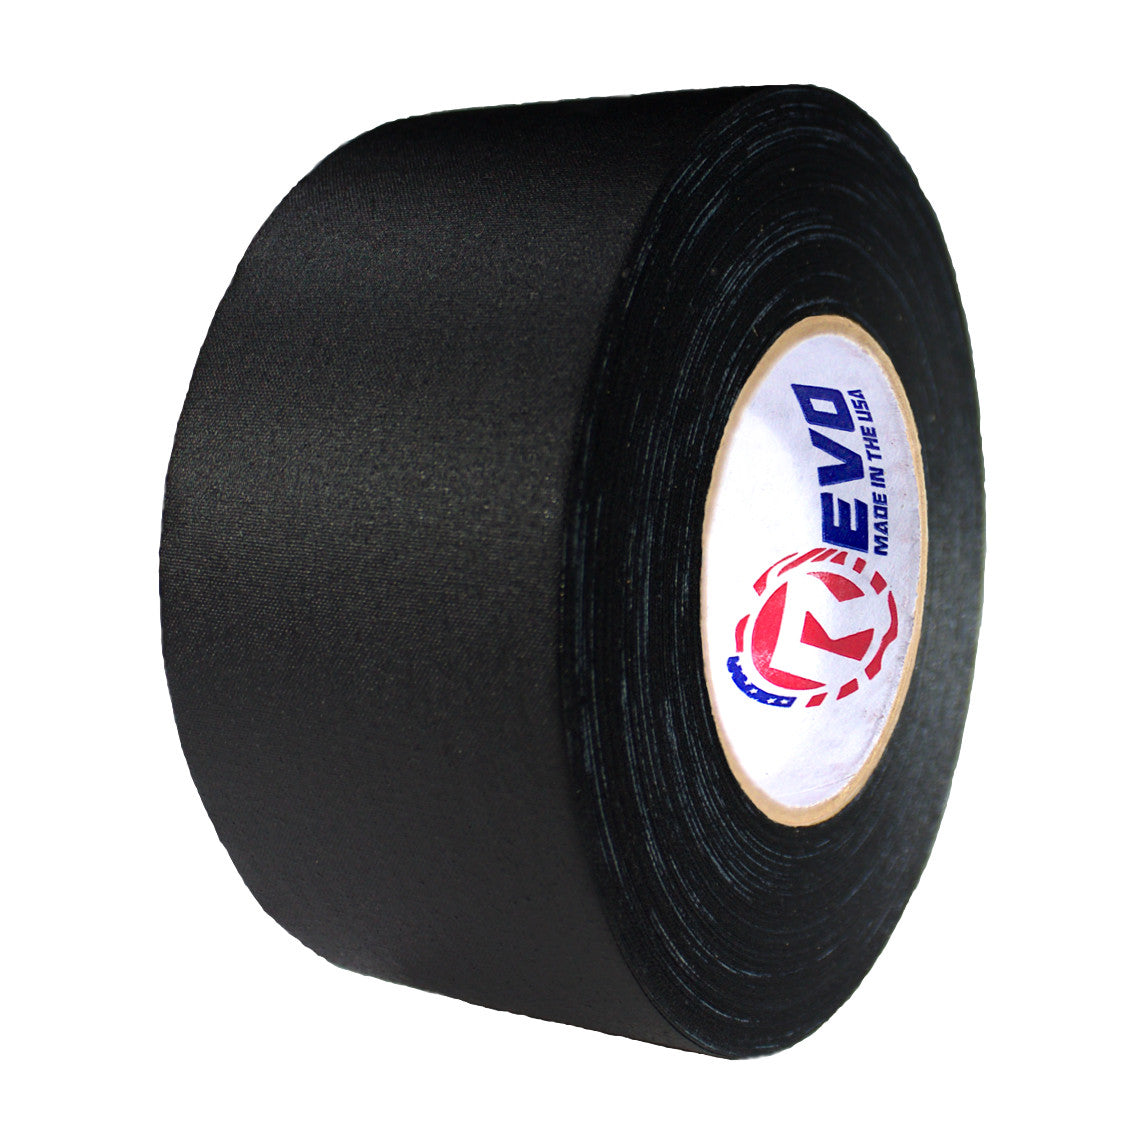 3" x 60 yards Black Gaffers Tape, Gaff Tape, Black Matte Tape, Photography Tape, Theater Tape, Stage Tape